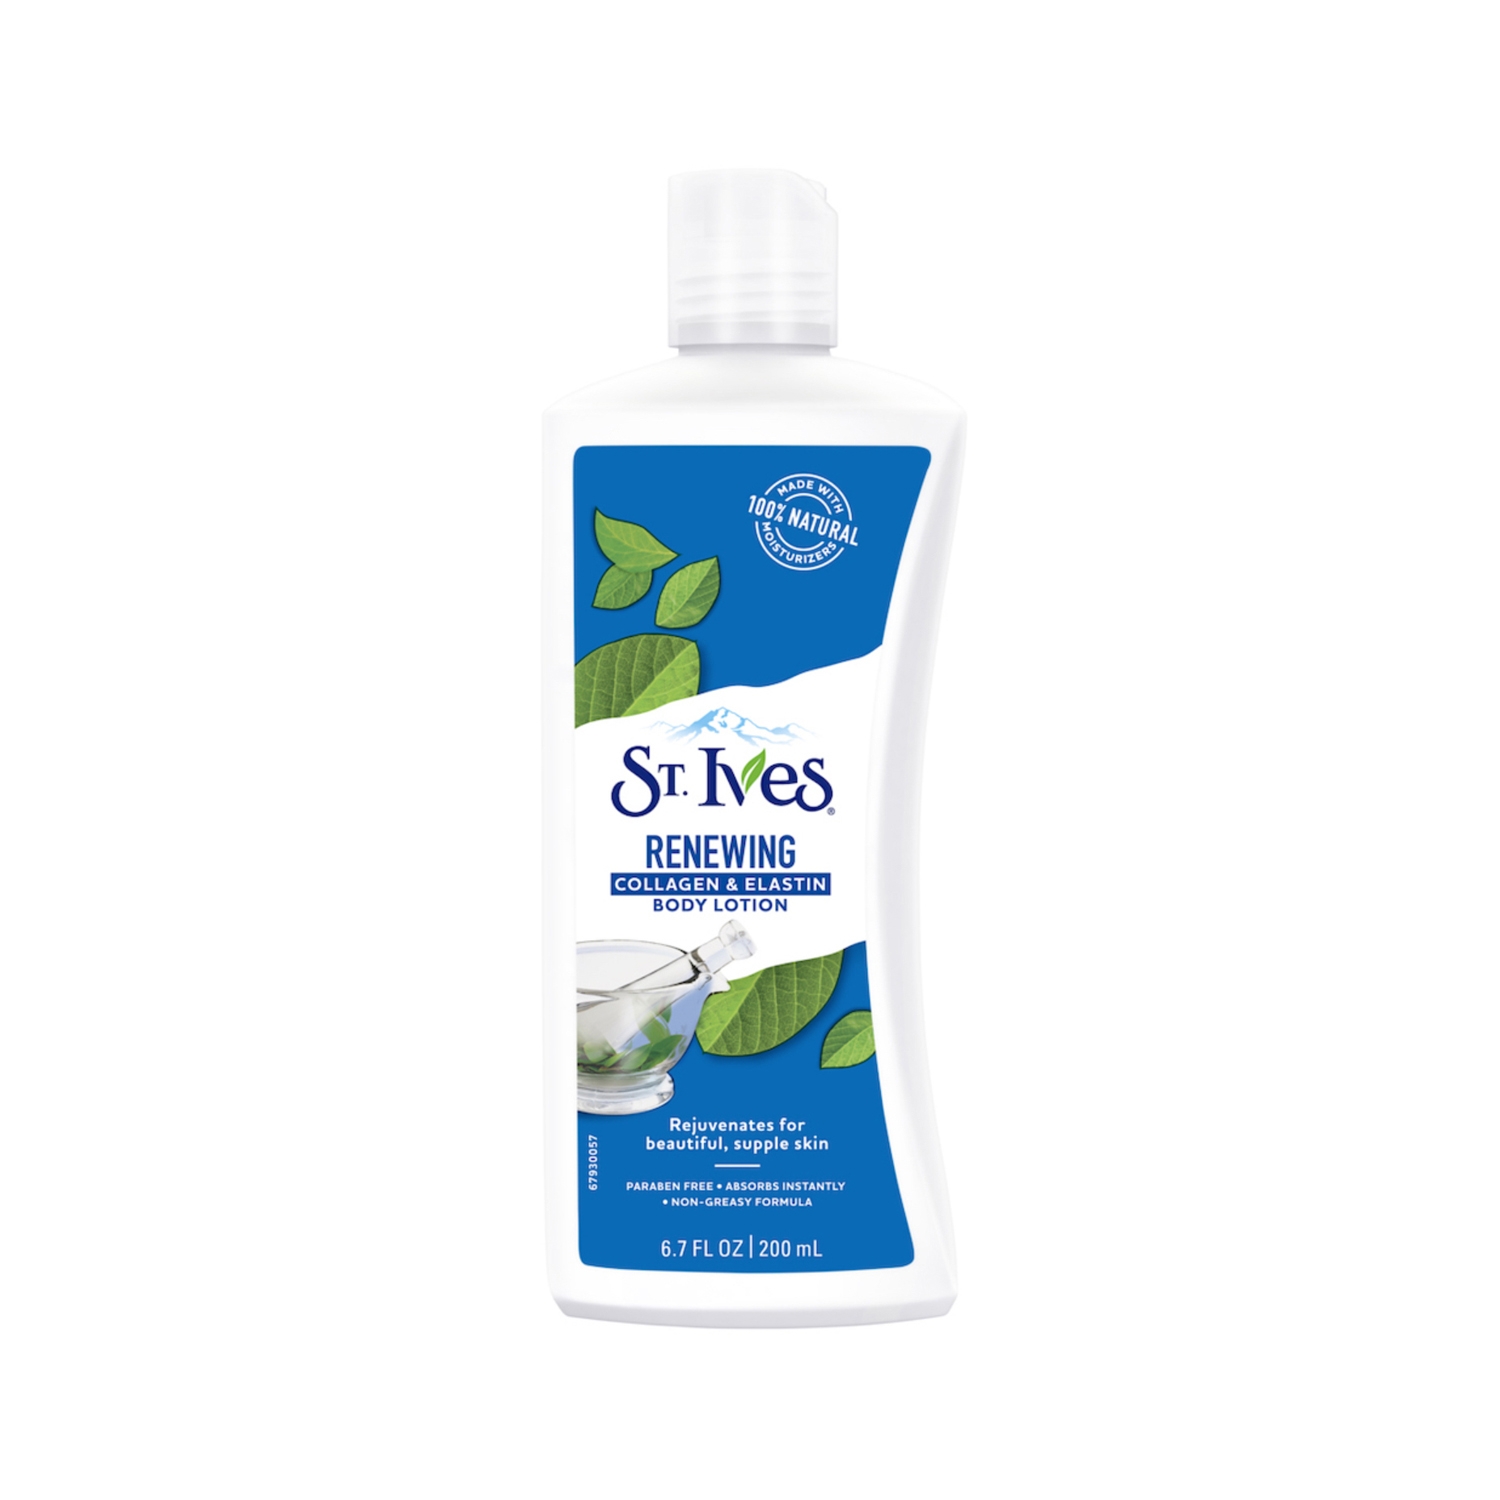 St. Ives | St. Ives Renewing Collagen & Elastin Body Lotion (200ml)